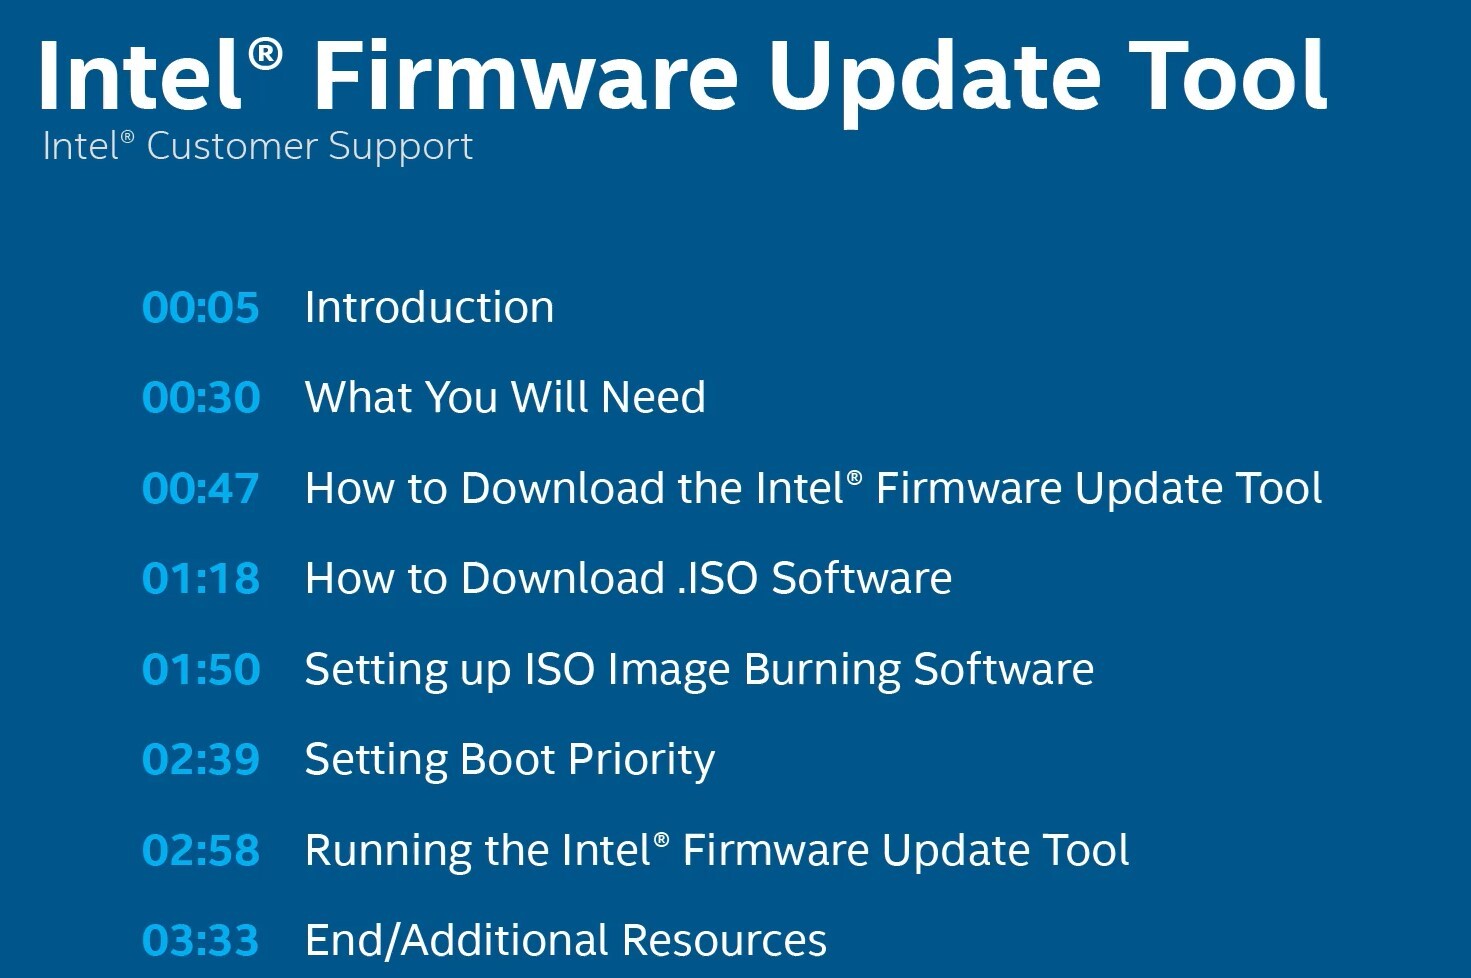 How to Firmware on Intel® with the Intel®...